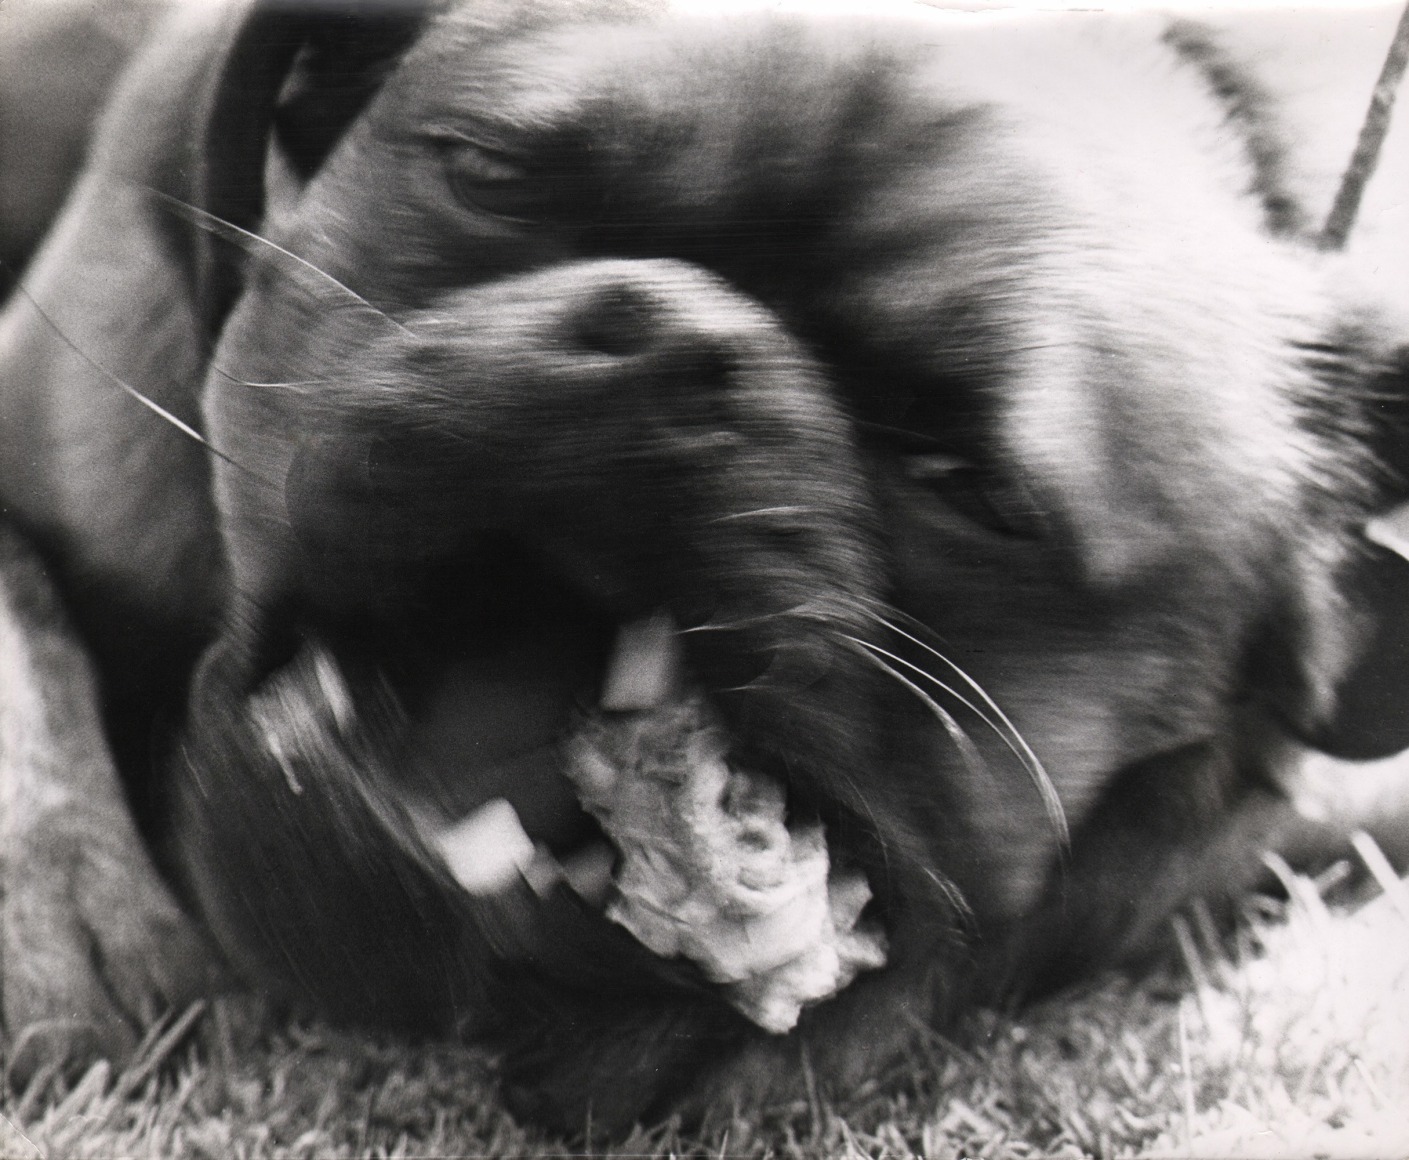 47. David T. Grewcock, Untitled, c. 1963. Close up of a dog, blurred with motion, chewing on something.